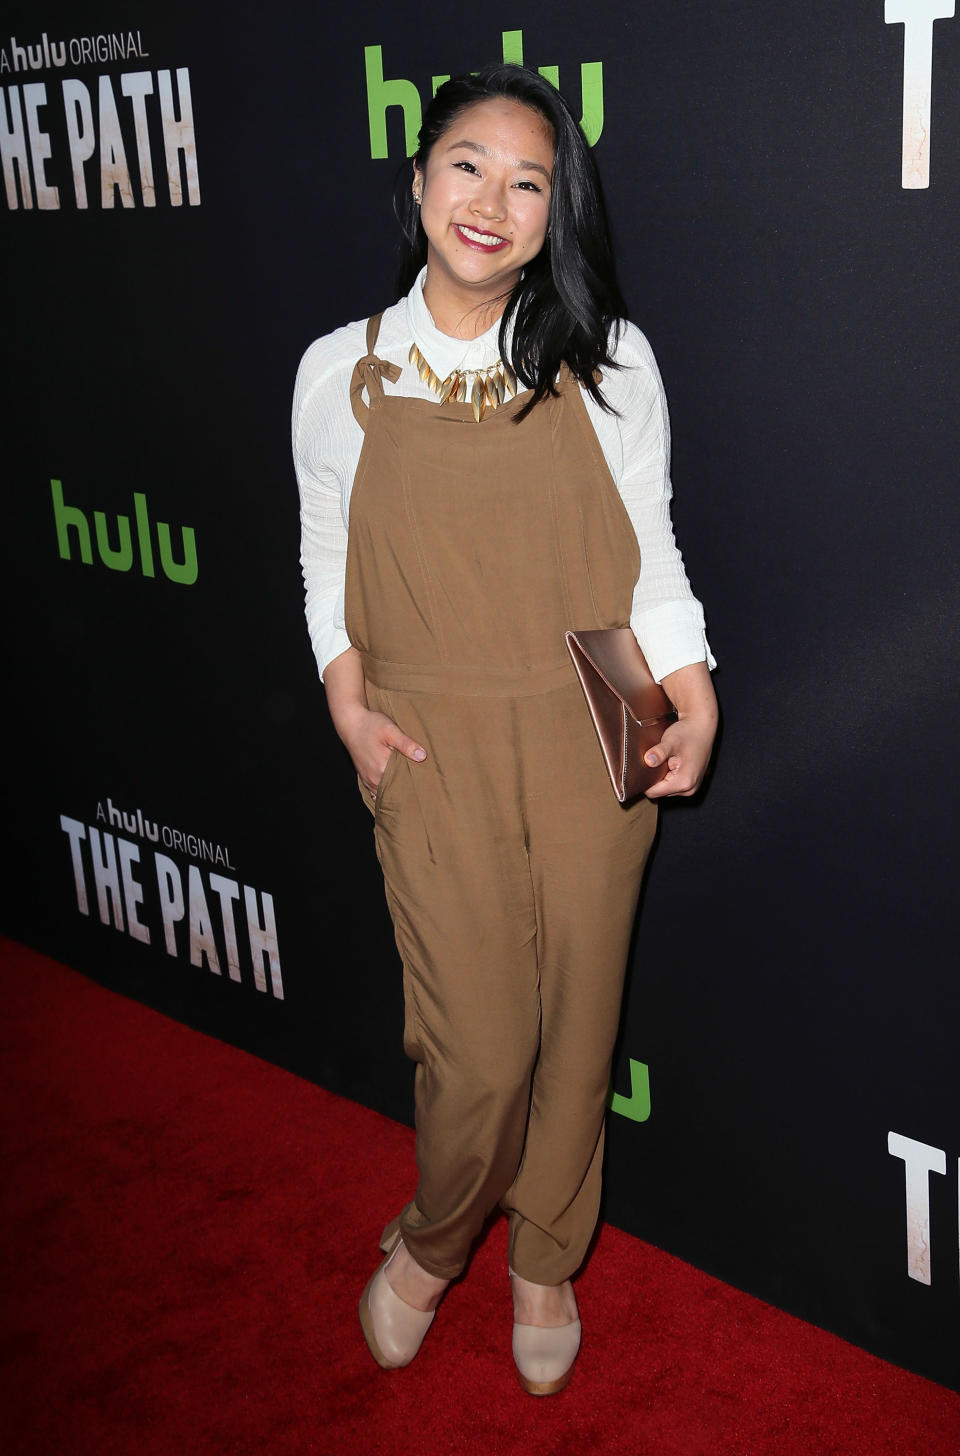 Stephanie Hsu attends the premiere of Hulu's "The Path" at ArcLight Hollywood